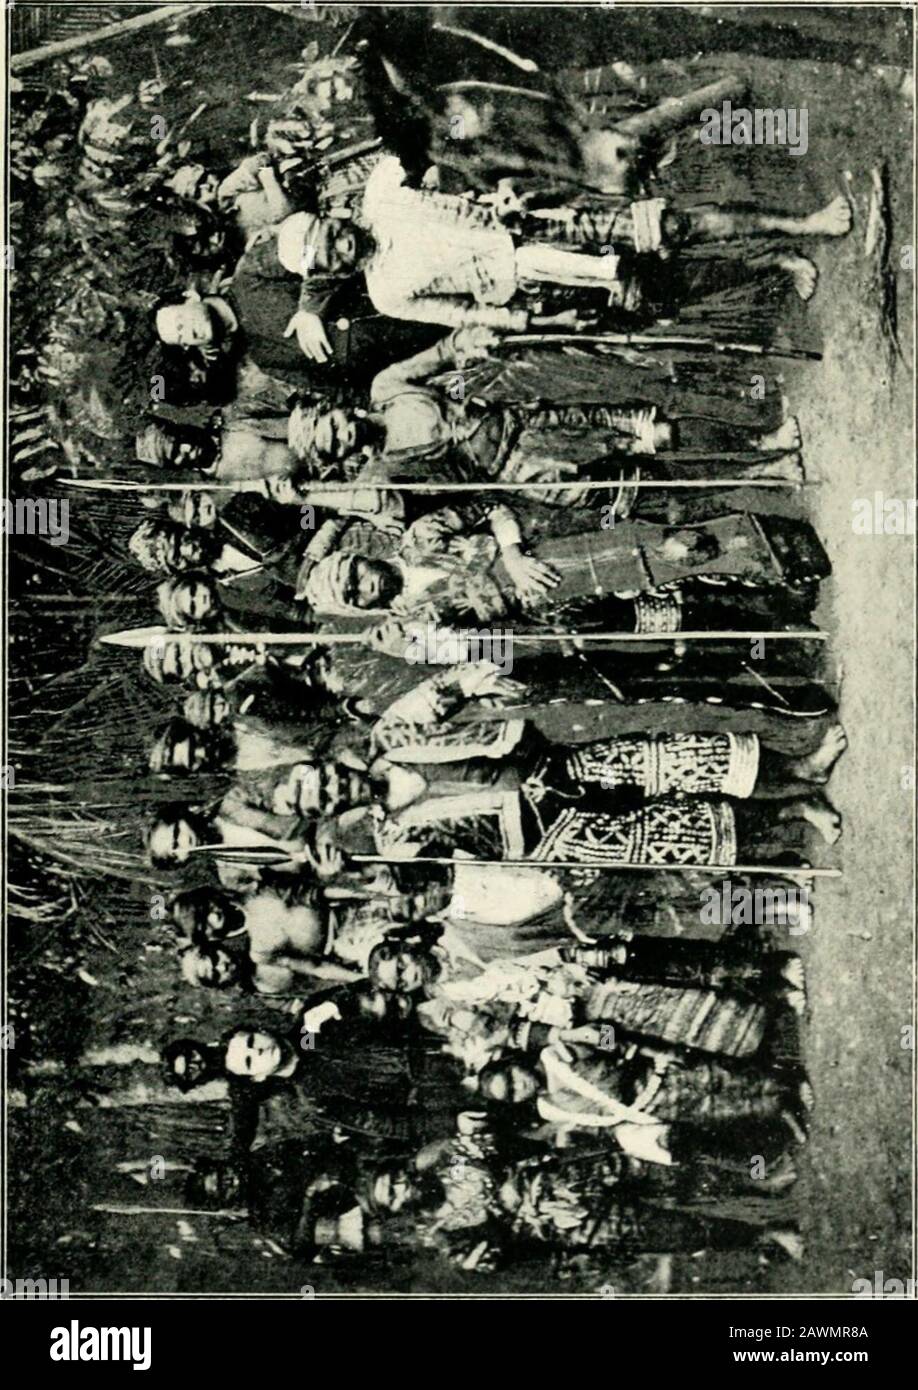 The inhabitants of the Philippines . o o. O 2 O &lt; BAGOBOS: THEIR BAPTISMS 351 and they were, till the Spanish-American war, under thespiritual care of the veteran missionary, Father Urios, andhis assistants. In October, 1894, 400 Bagobos were bap-tized. I am unable to give the numbers of the Bagobos,even approximately, but, from the small territory theyoccupy, they cannot be numerous. The illustration shows the celebrated Datto Manib, oneof the principal baganis (head-murderers) of the Bagobos,of the Apo, accompanied by his lance-bearers, one of whomholds the quiap. Behind him are some of h Stock Photo